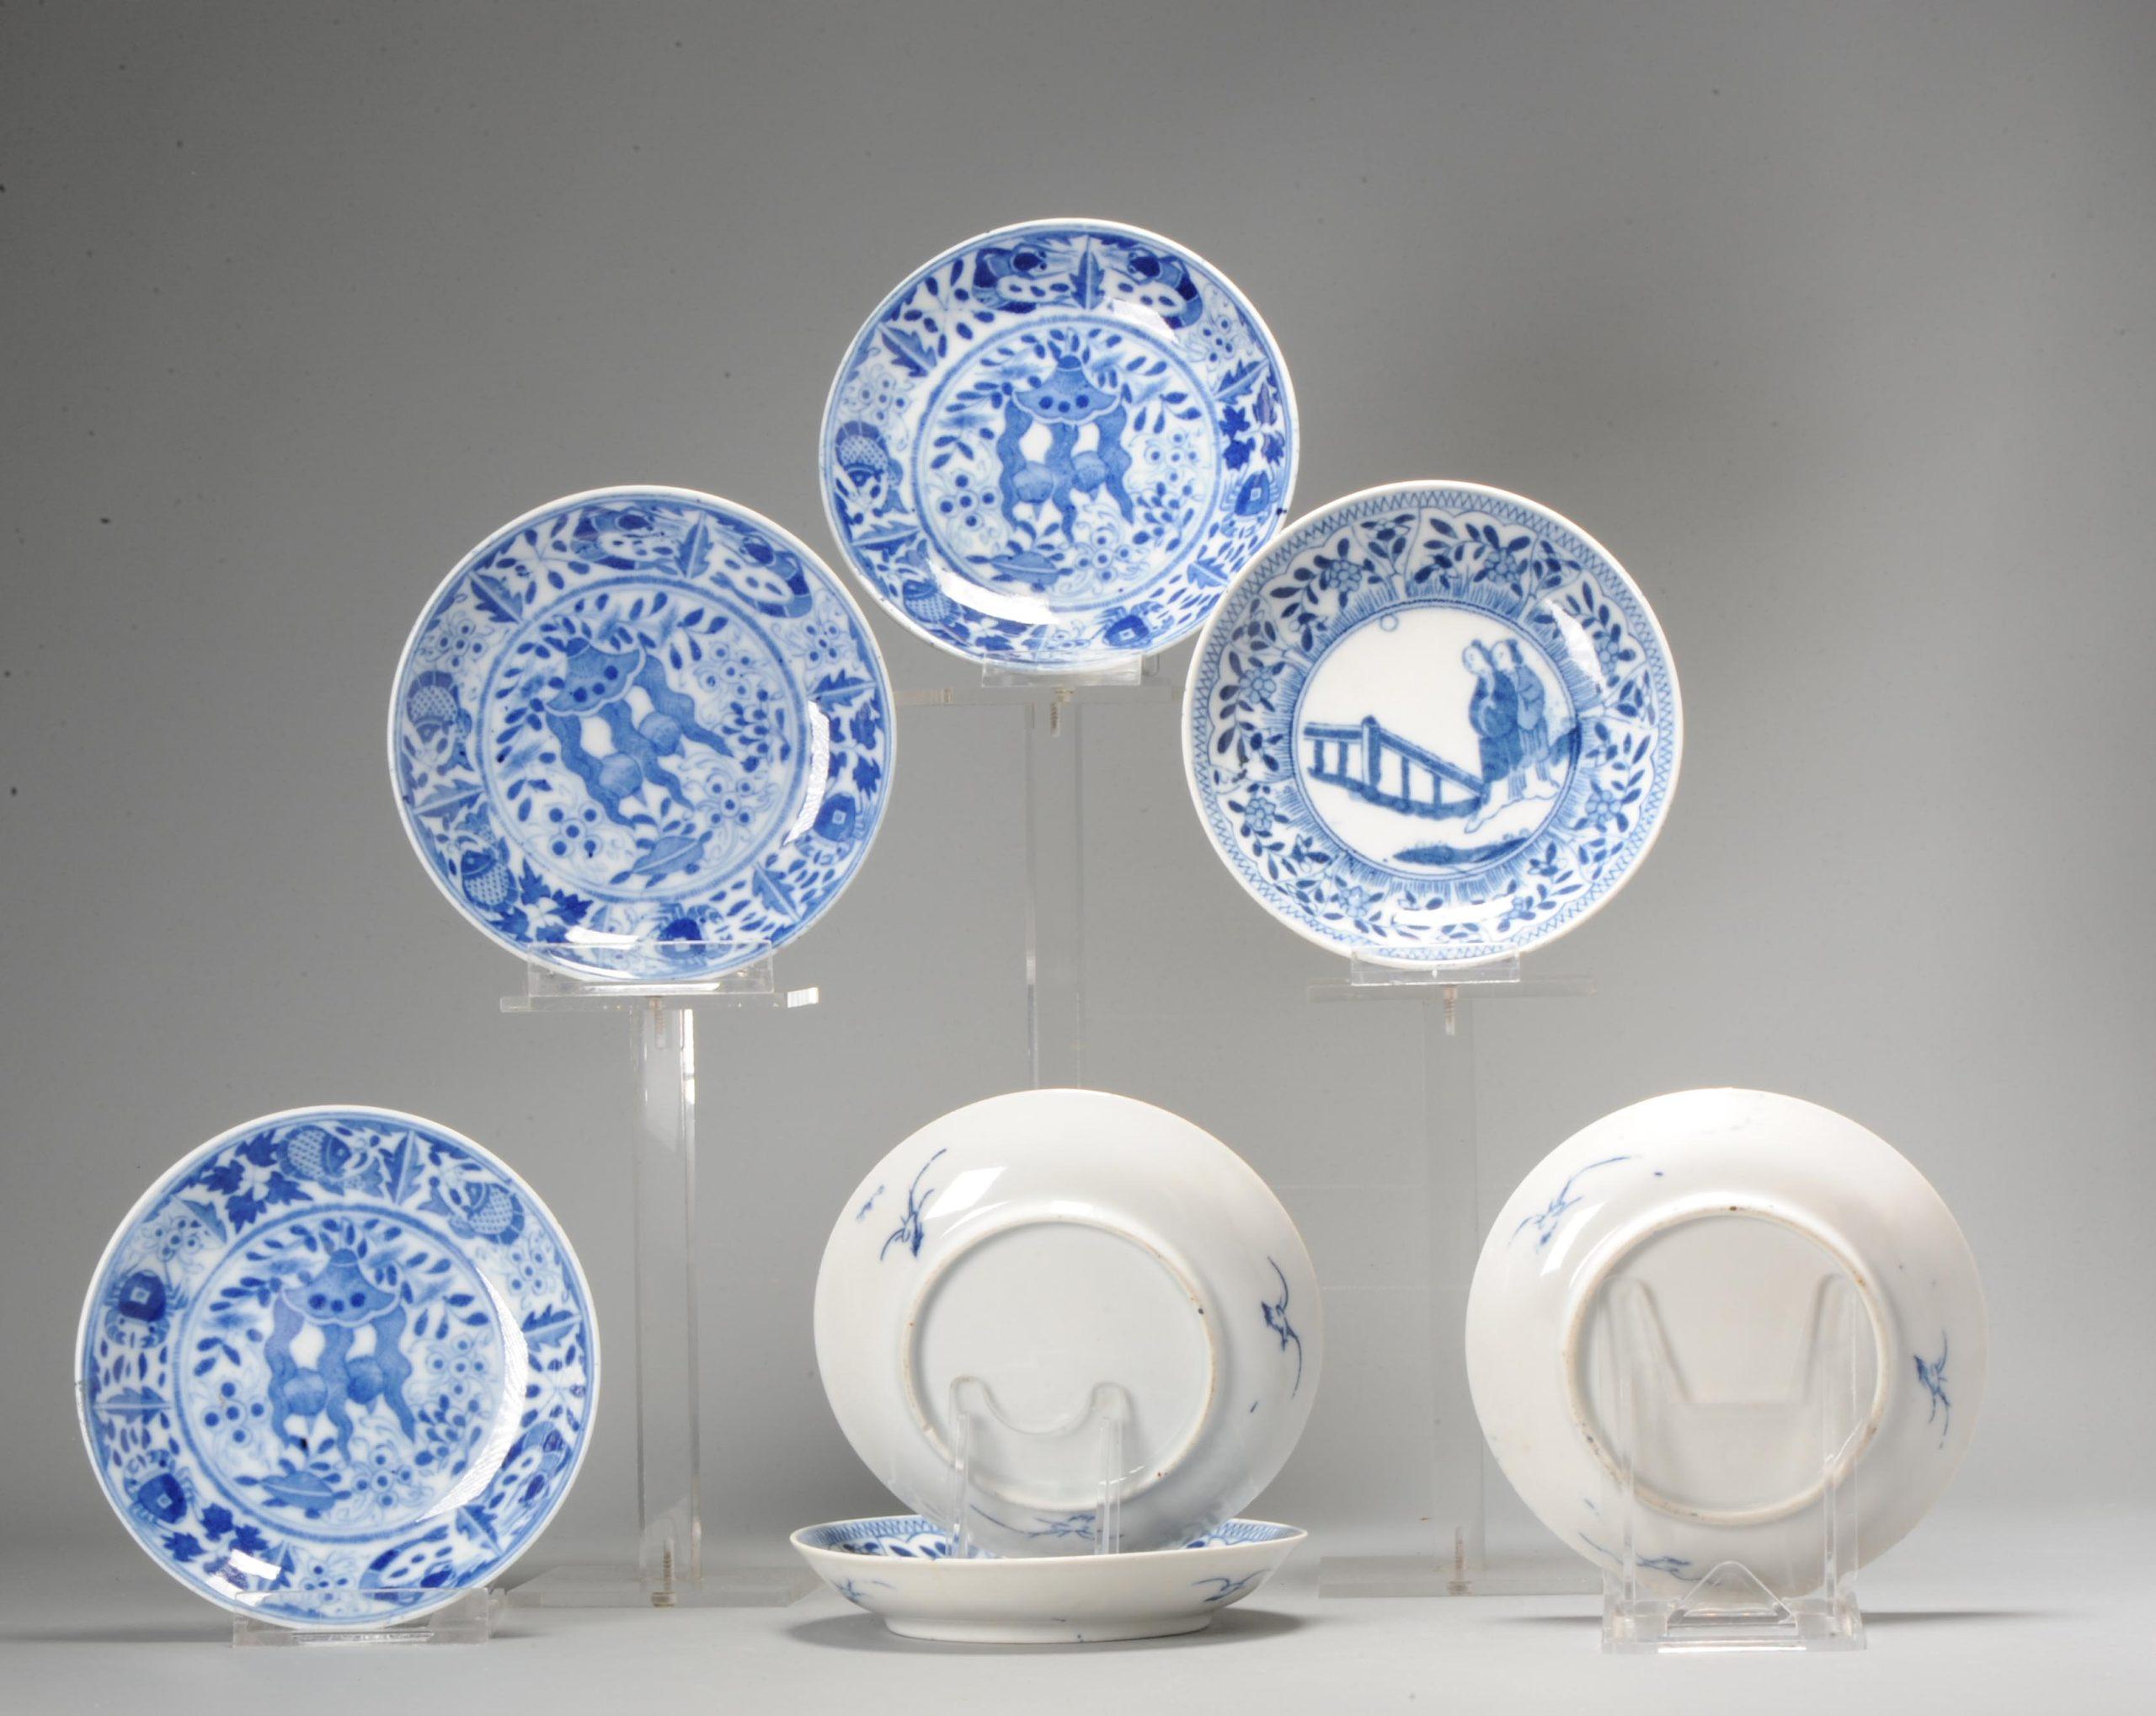 Very nice antique mosa plates from ca 1900. In Kangxi style.

Additional information:
Material: Porcelain & Pottery
Type: Plates
Color: lue & White
Region of Origin: Europe
Period: 20th century
Age: ca 1900
Condition: 1 dish with some frits/chips, 1